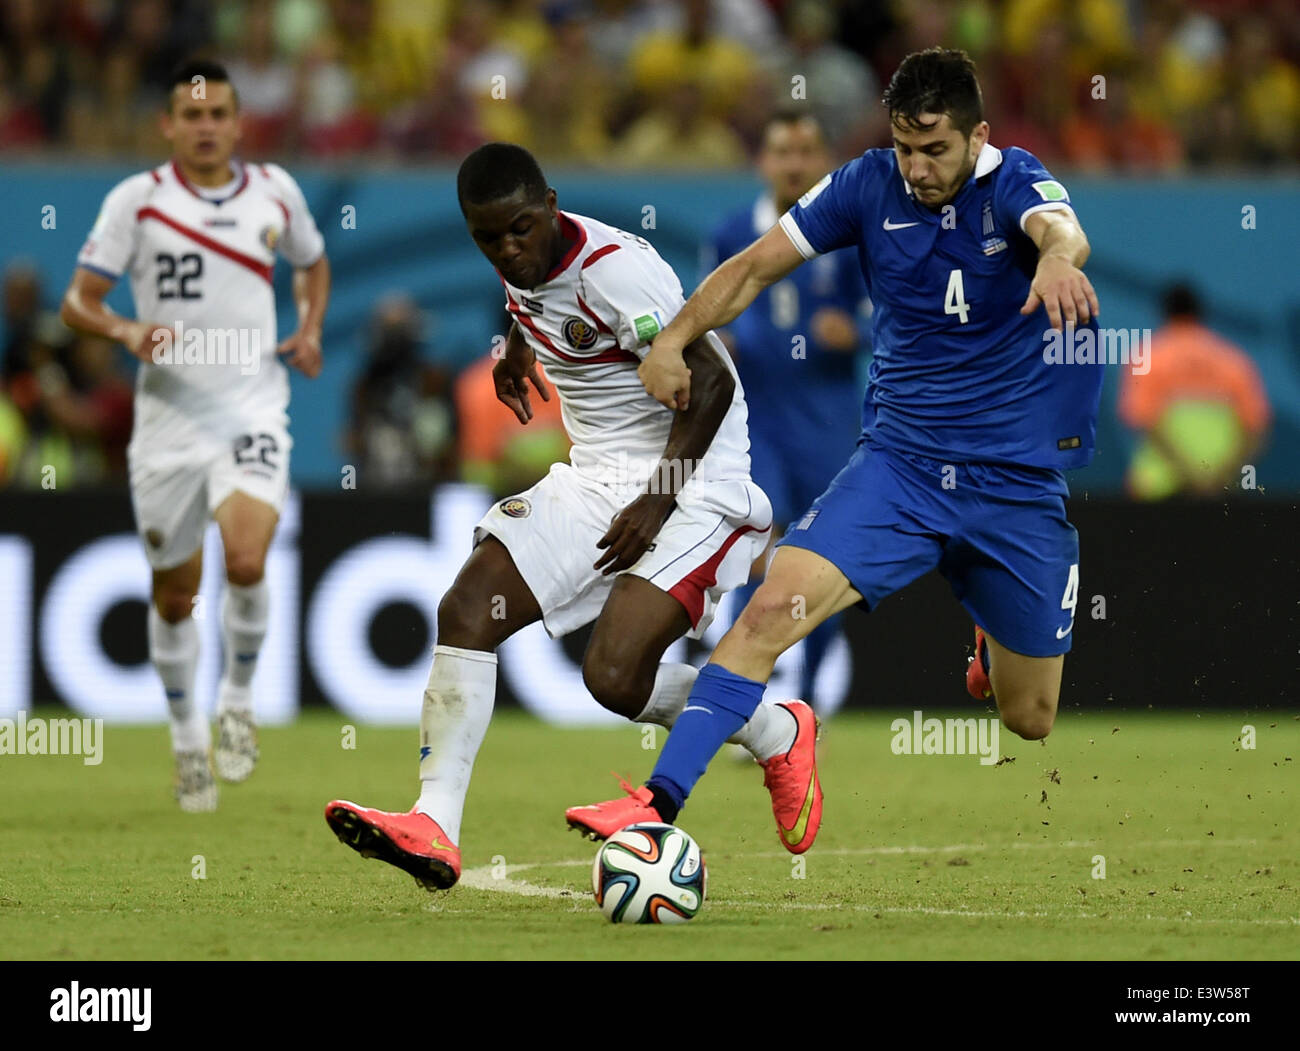 Recife, Brazil. 29th June, 2014. Greece's Kostas Manolas (R, front) competes with Costa Rica's Joel Campbell during a Round of 16 match between Costa Rica and Greece of 2014 FIFA World Cup at the Arena Pernambuco Stadium in Recife, Brazil, on June 29, 2014. Credit:  Yang Lei/Xinhua/Alamy Live News Stock Photo